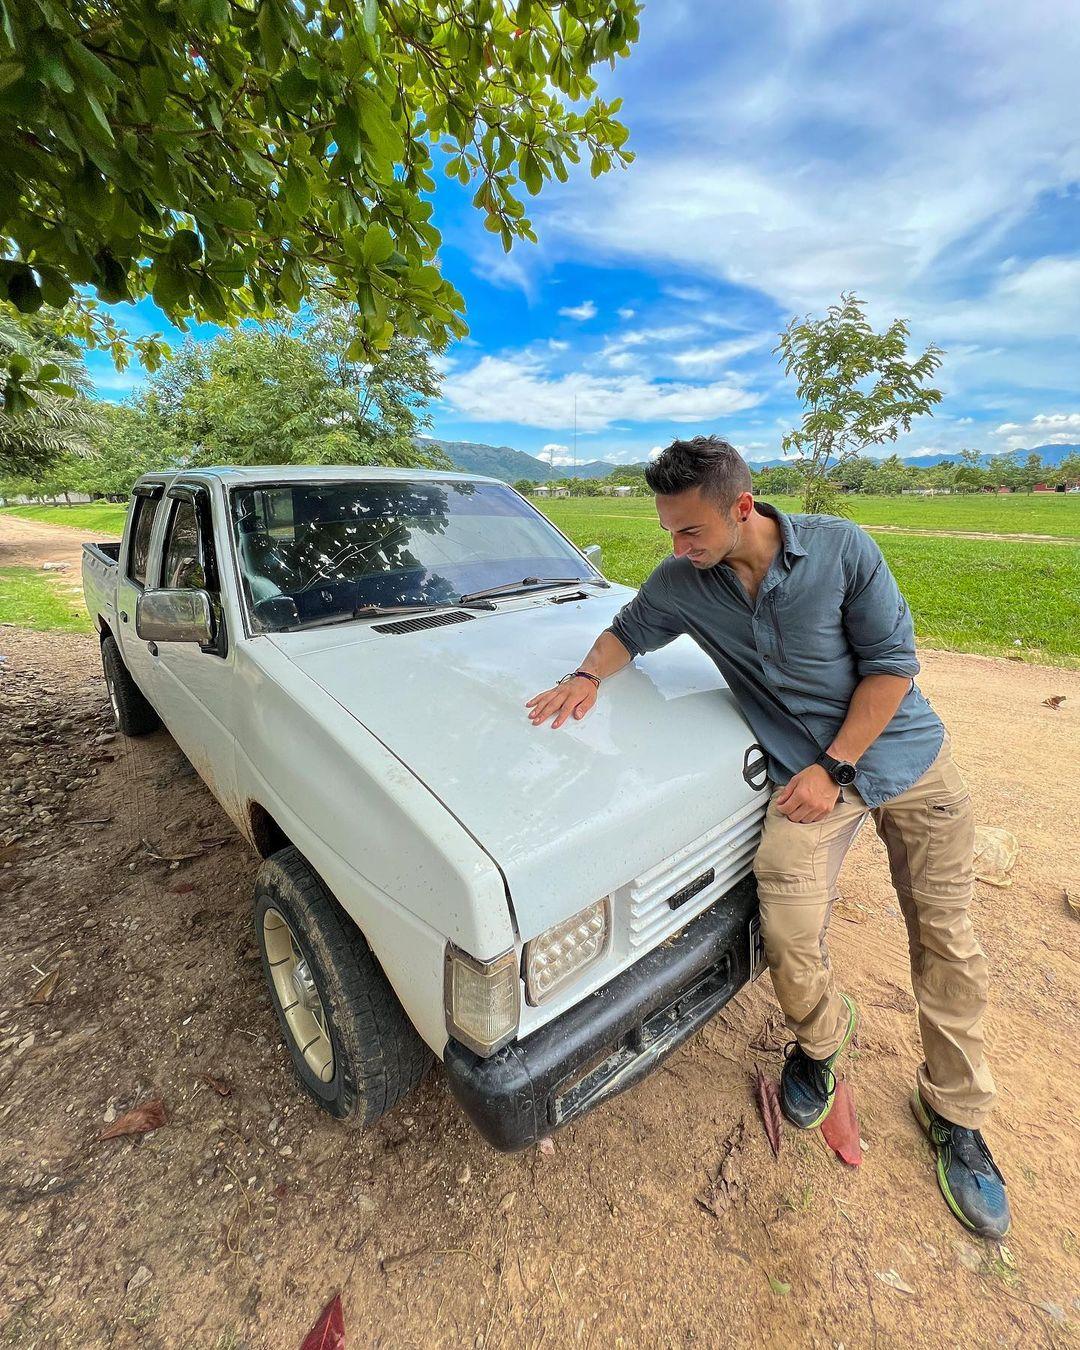 class="content__text"
 Love-hate relationship with this car 💔

Last episode of Expedition Unexpected: Latin America 🌎 coming tomorrow!

 #Yoro #Honduras #LluviaDePeces 
 